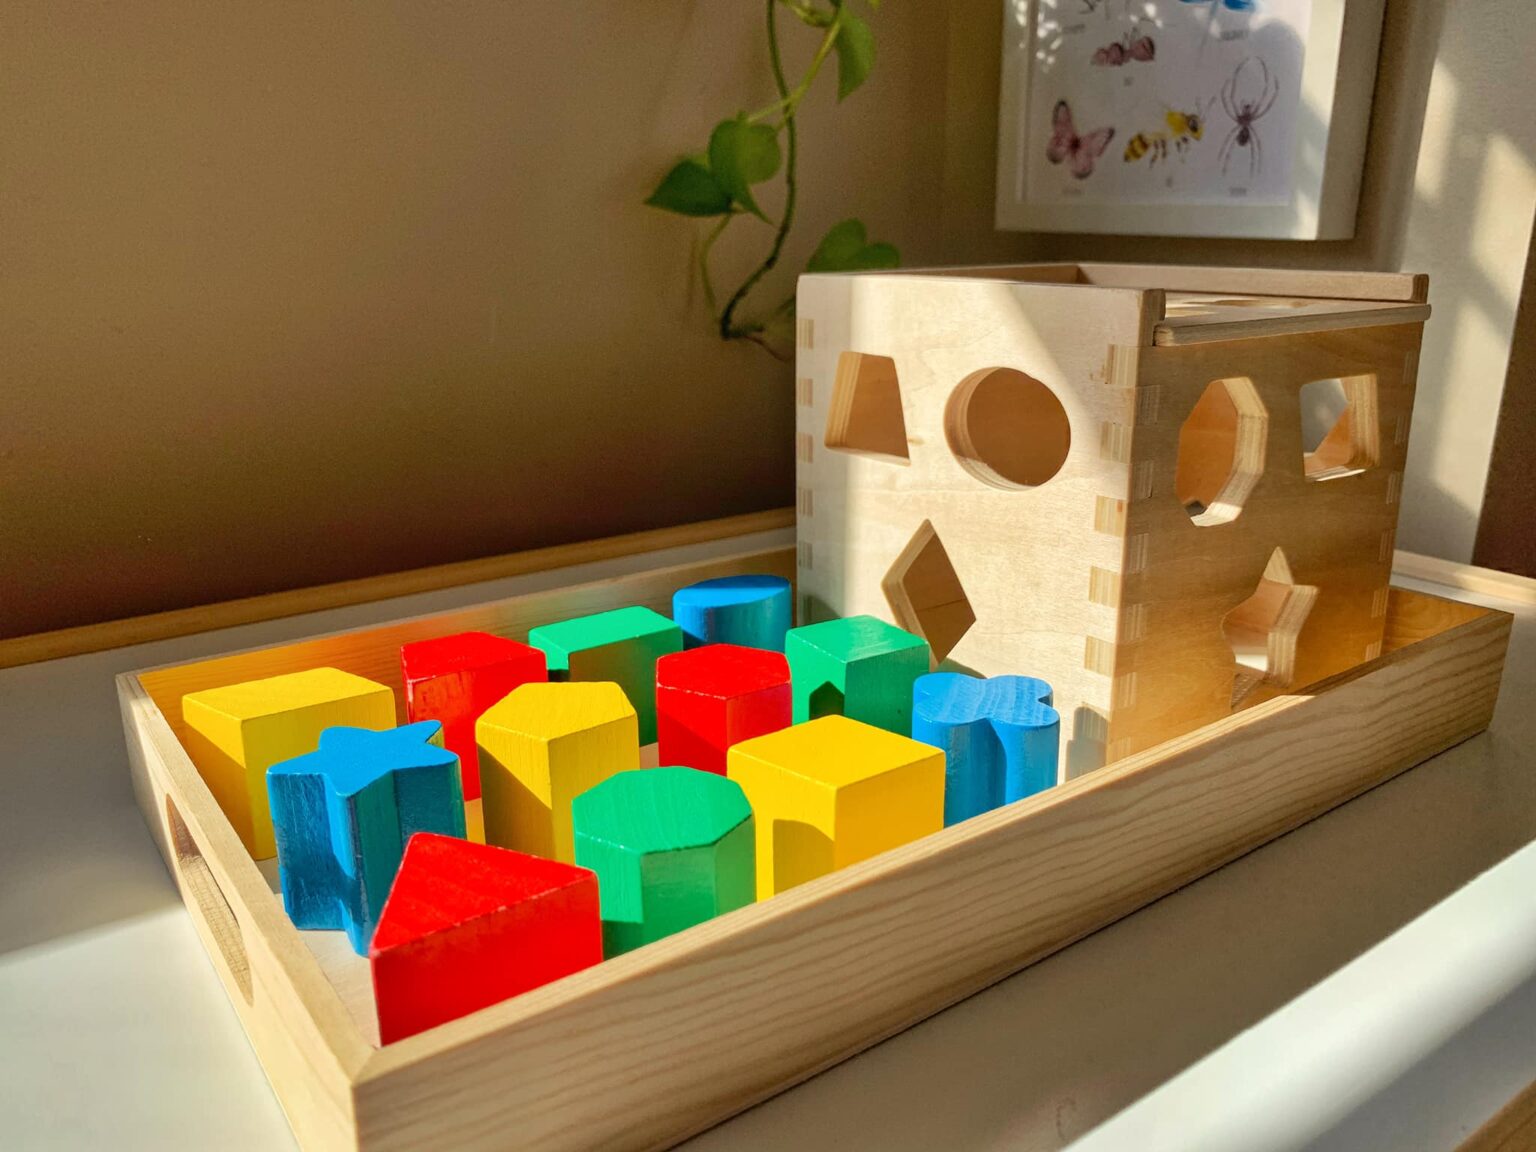 Blocks & Building Activities for Toddlers (easy) - My Bored Toddler